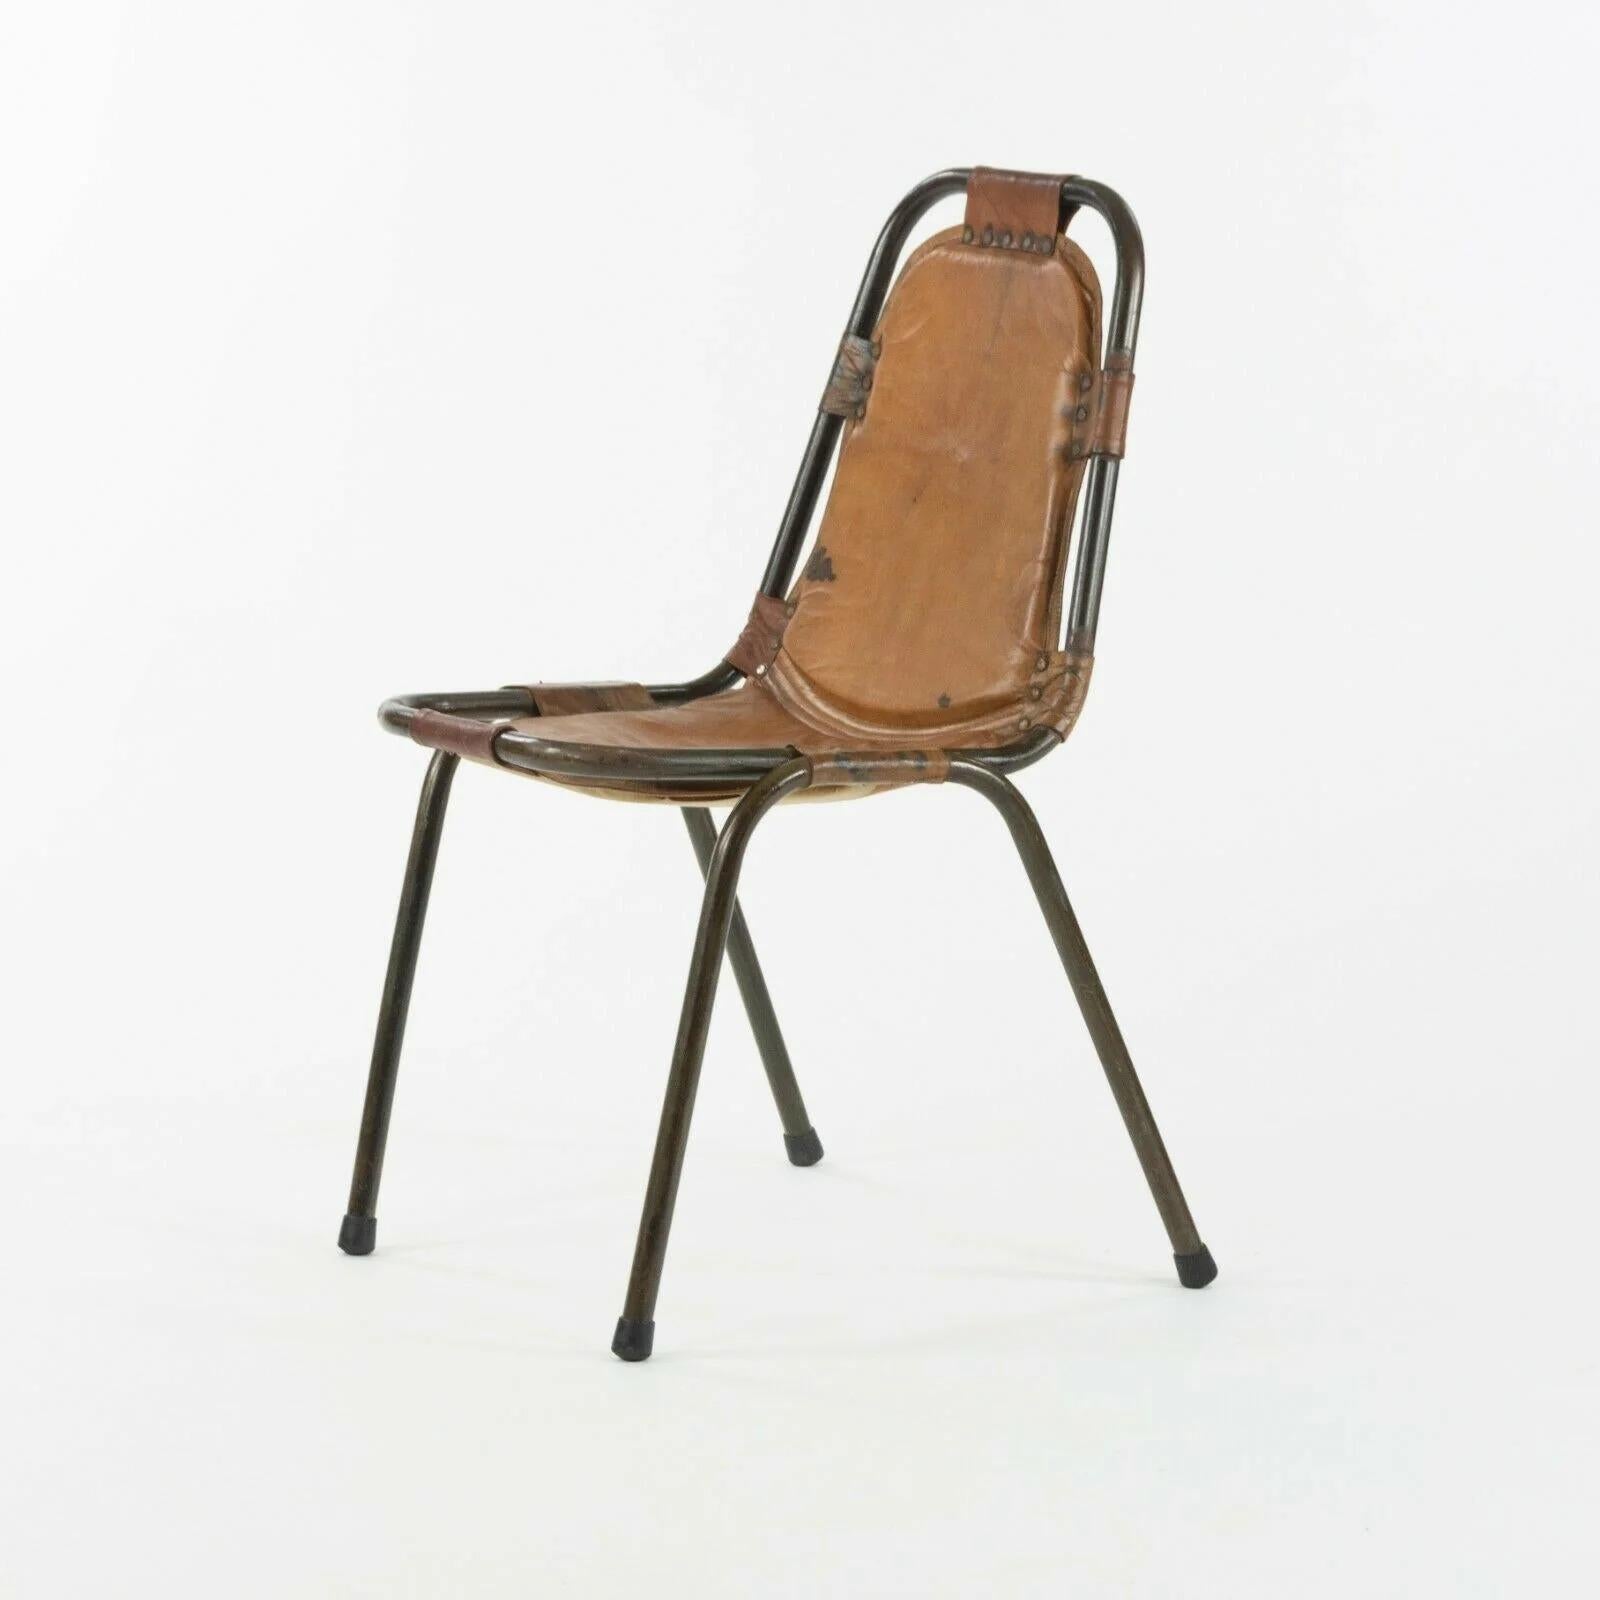 1960s Dal Vera Stacking Chairs for Charlotte Perriand Les Arcs Resort Set of 6 For Sale 1